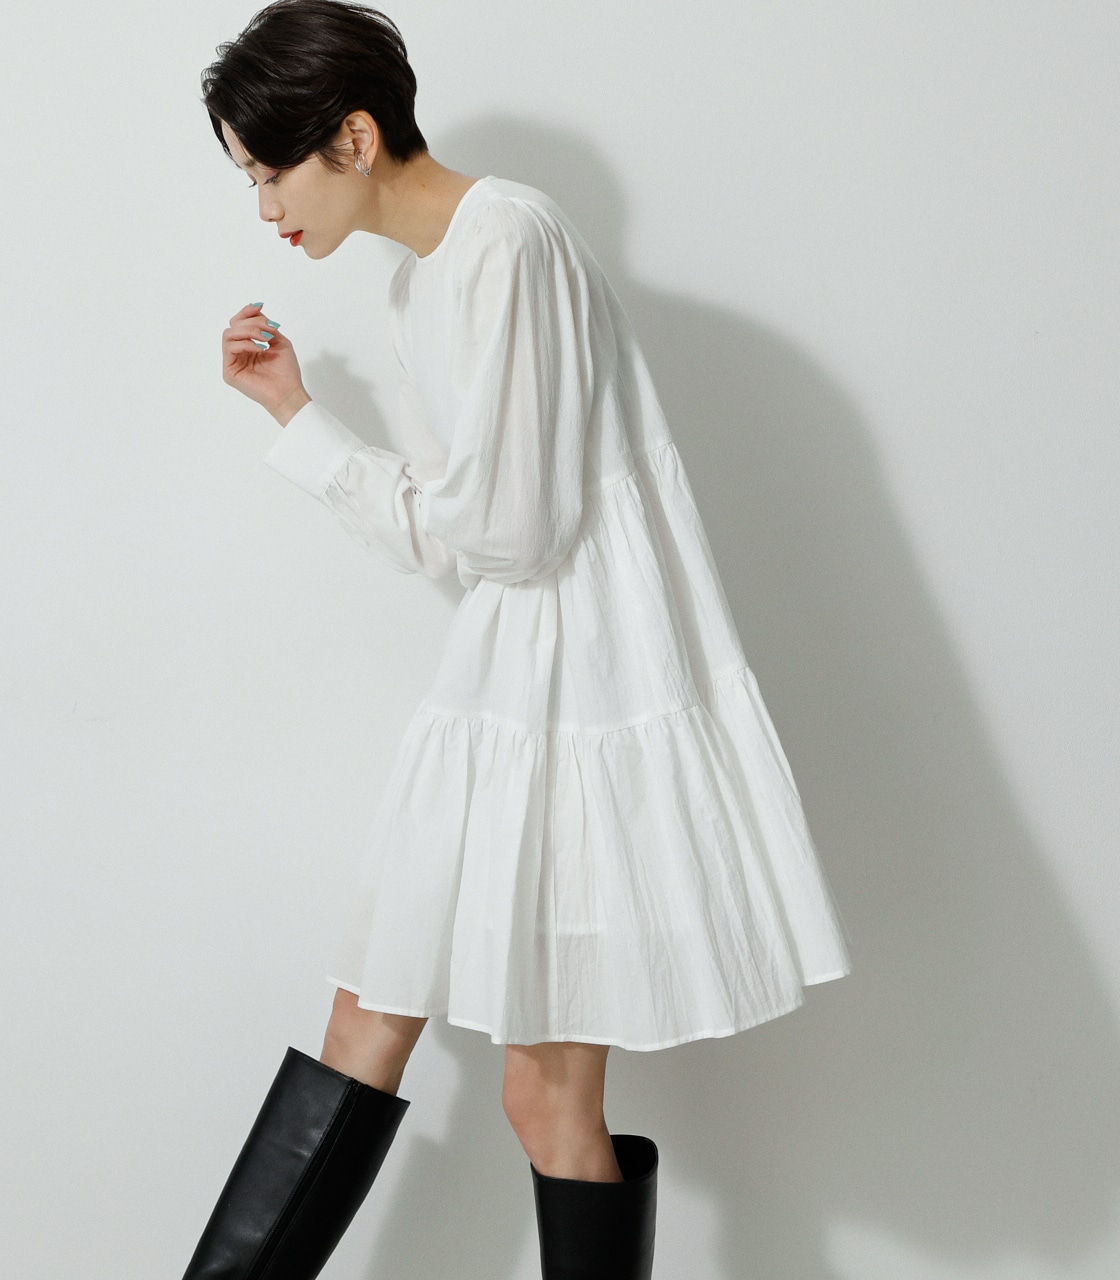 MINI TIERED ONEPIECE/ミニティアードワンピース 詳細画像 WHT 2